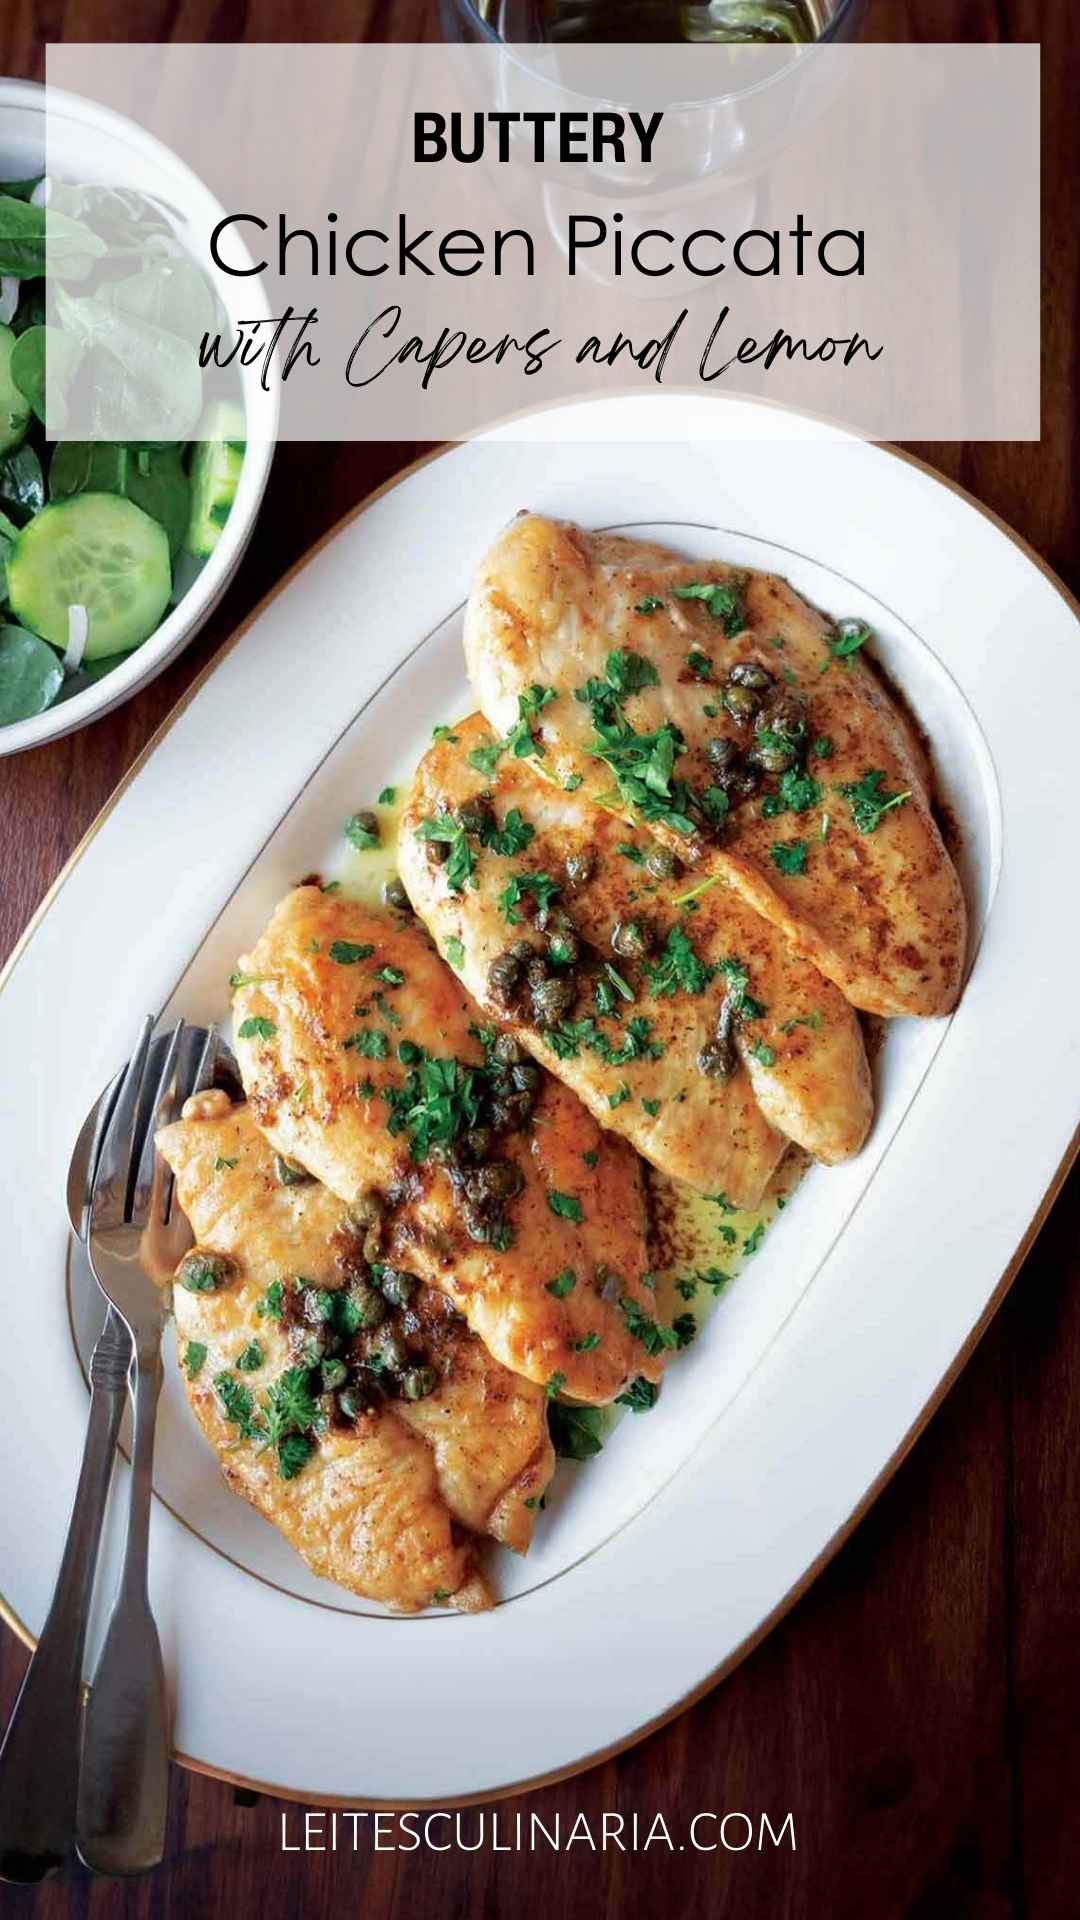 Four chicken cutlets topped with capers, parsley, and butter sauce on a white oval platter.